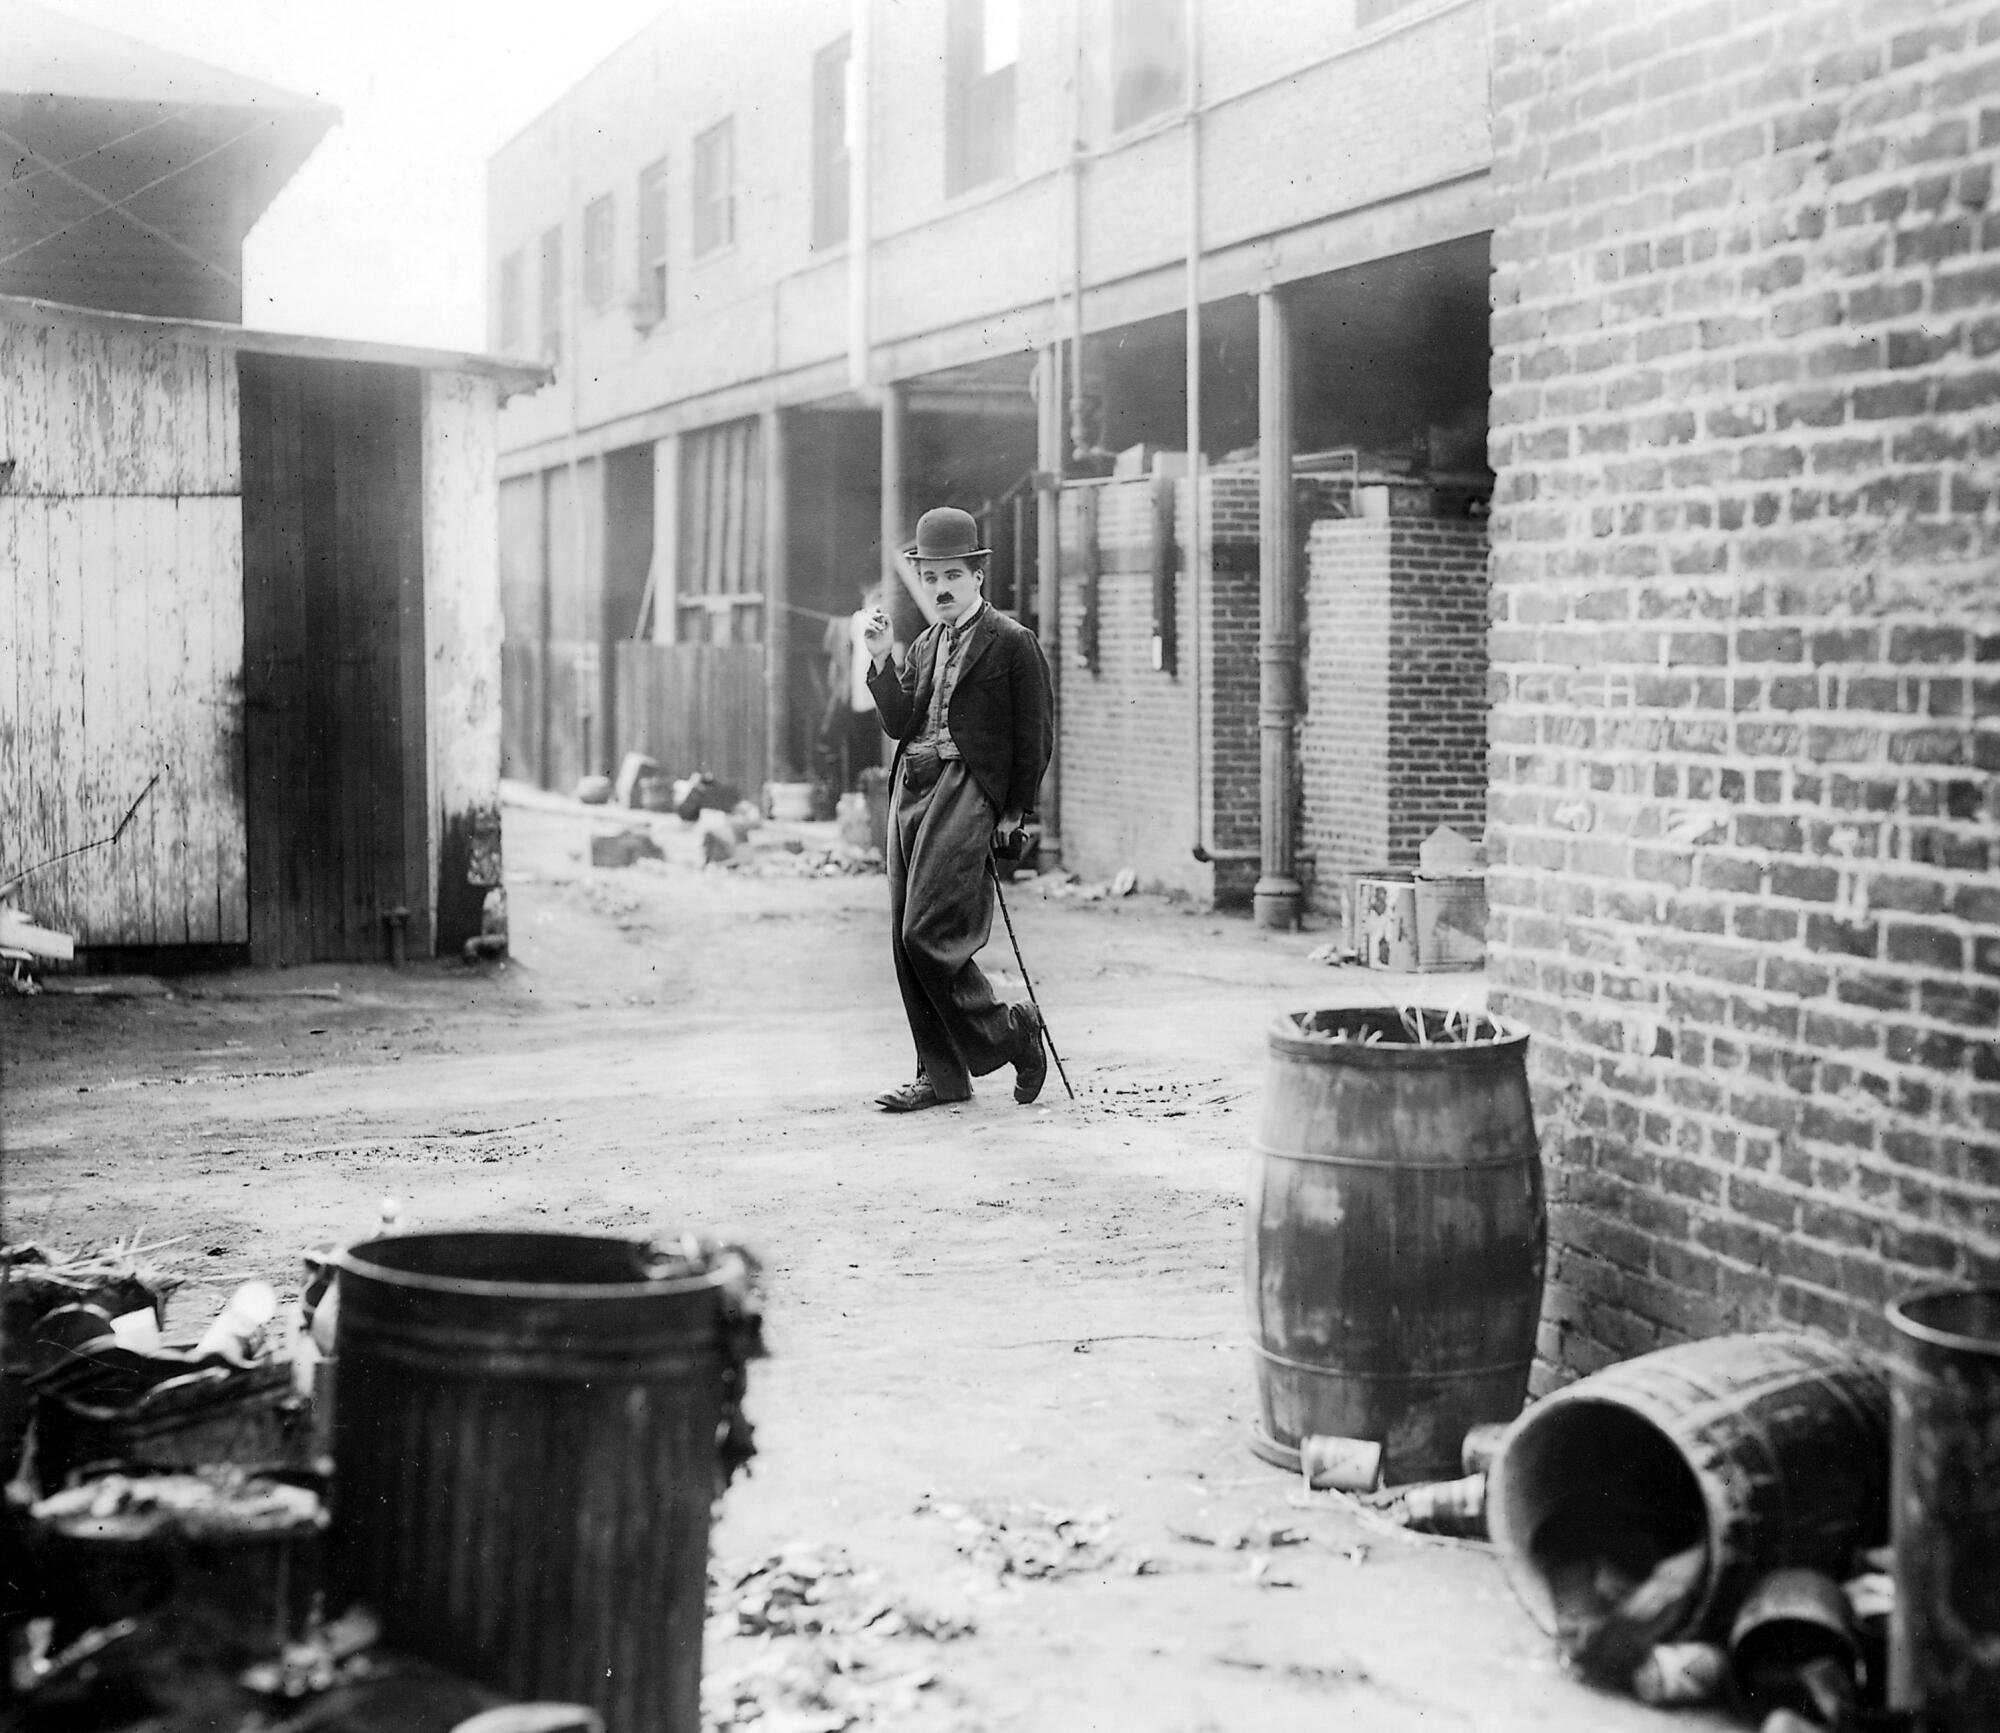  Charlie Chaplin poses in an alleyway, leaning on a cane